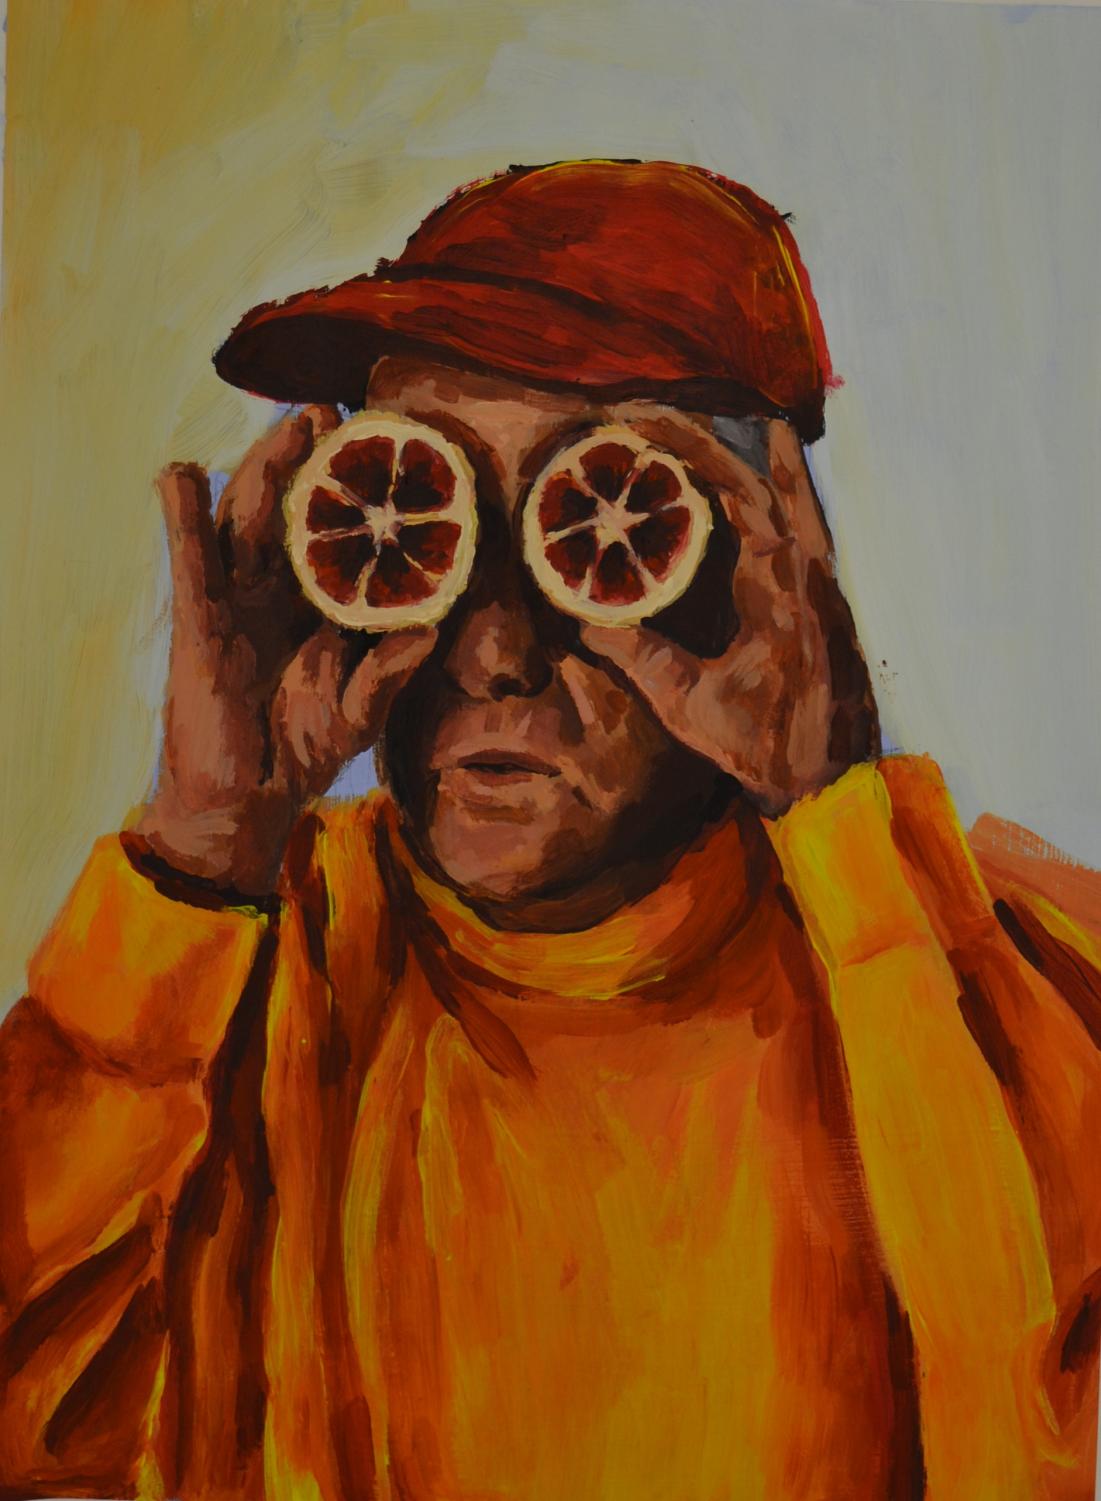 Tyler Canadys Acrylic painting called “Citrus Man”.